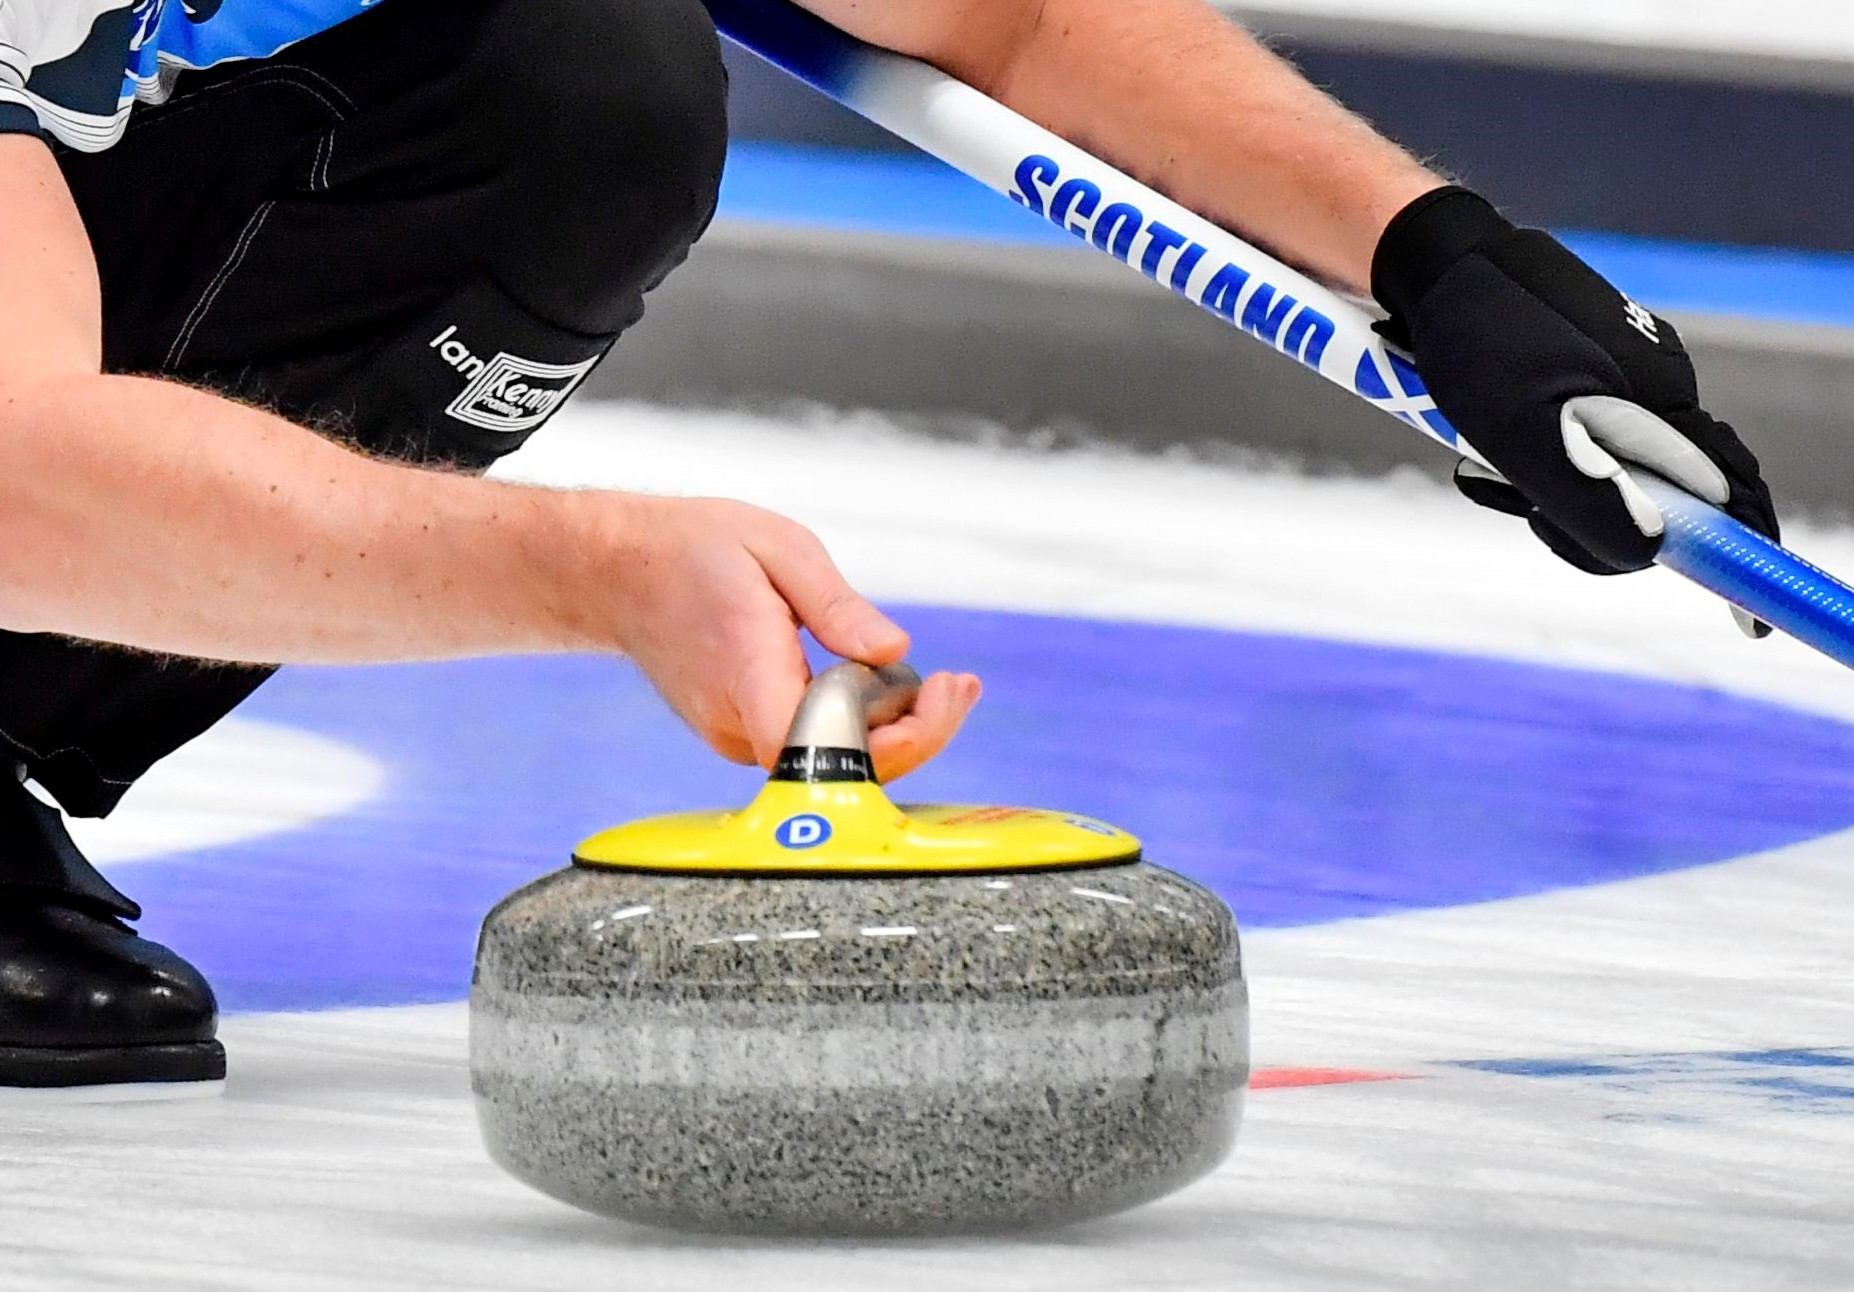 Scotland have won gold and bronze at the World Junior Curling Championships ©Getty Images